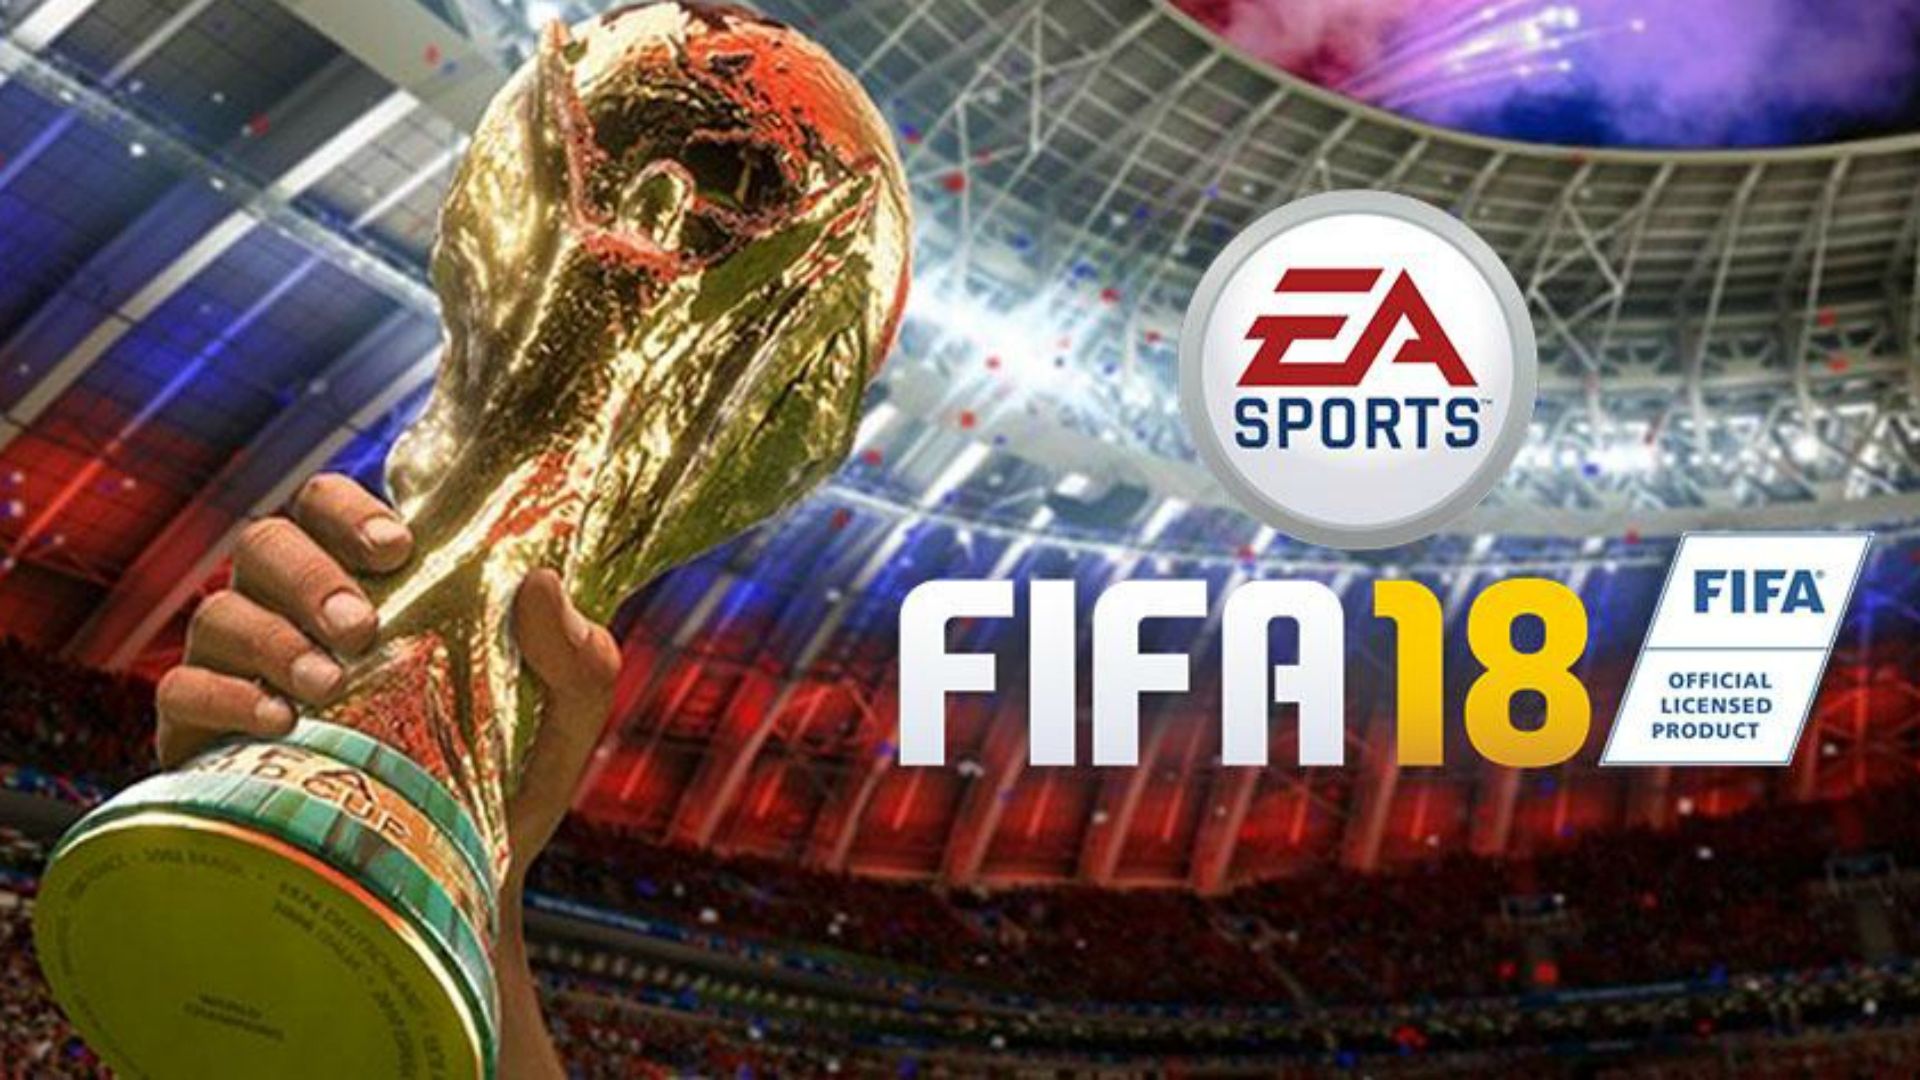 FIFA 19: Play World Cup mode free for a limited time | Goal.com